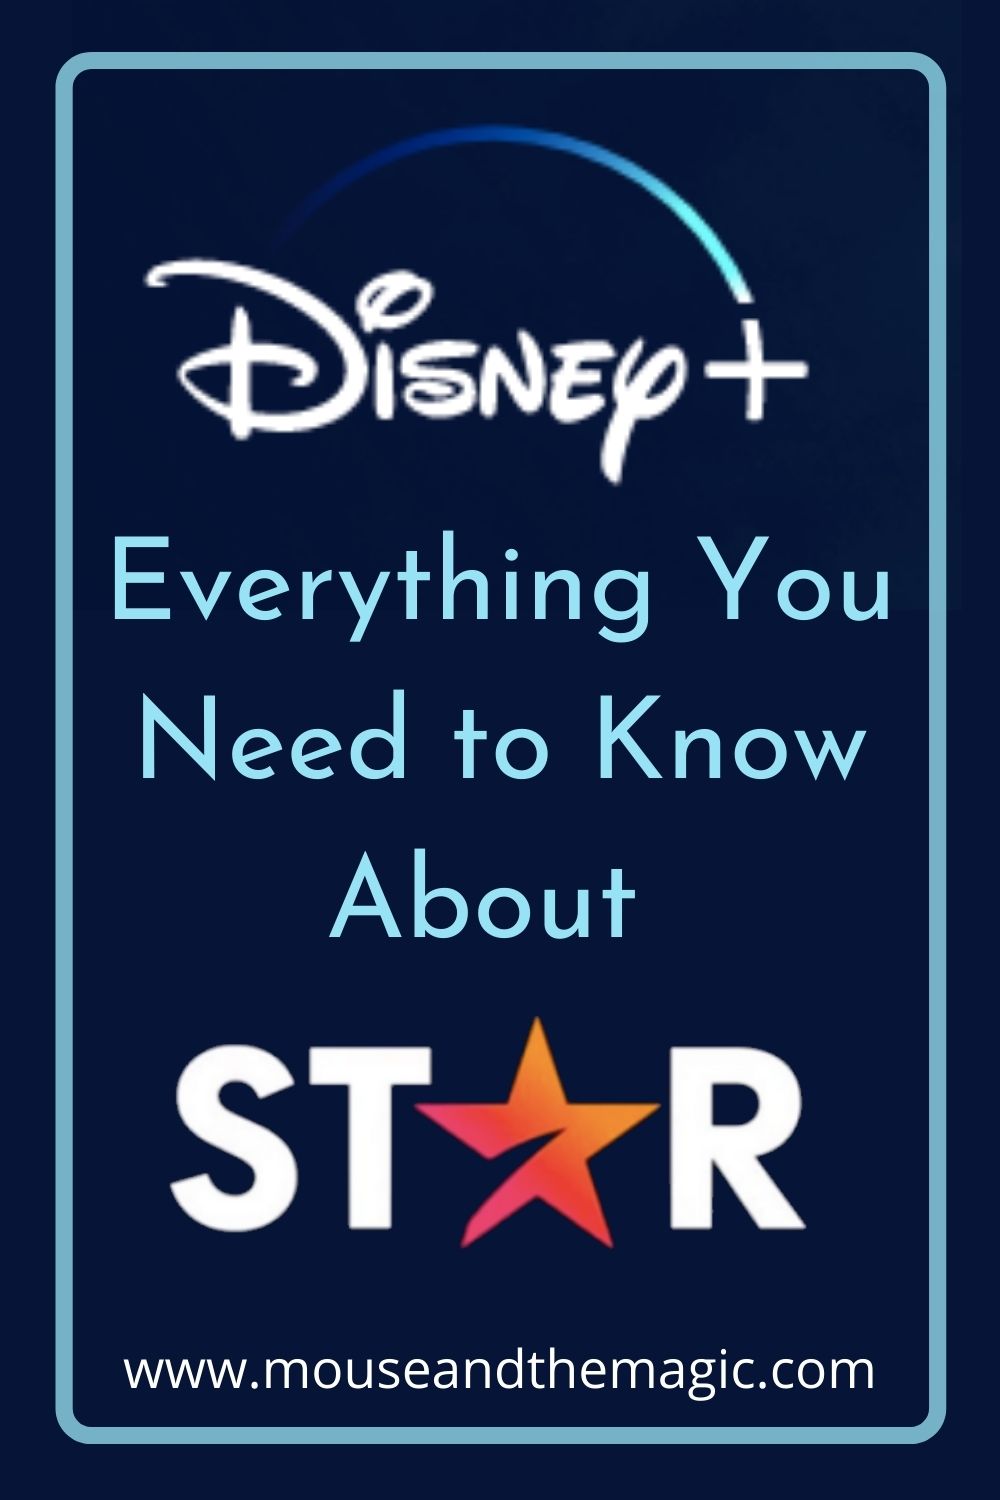 Disney Star on Disney + Everything You Need To Know